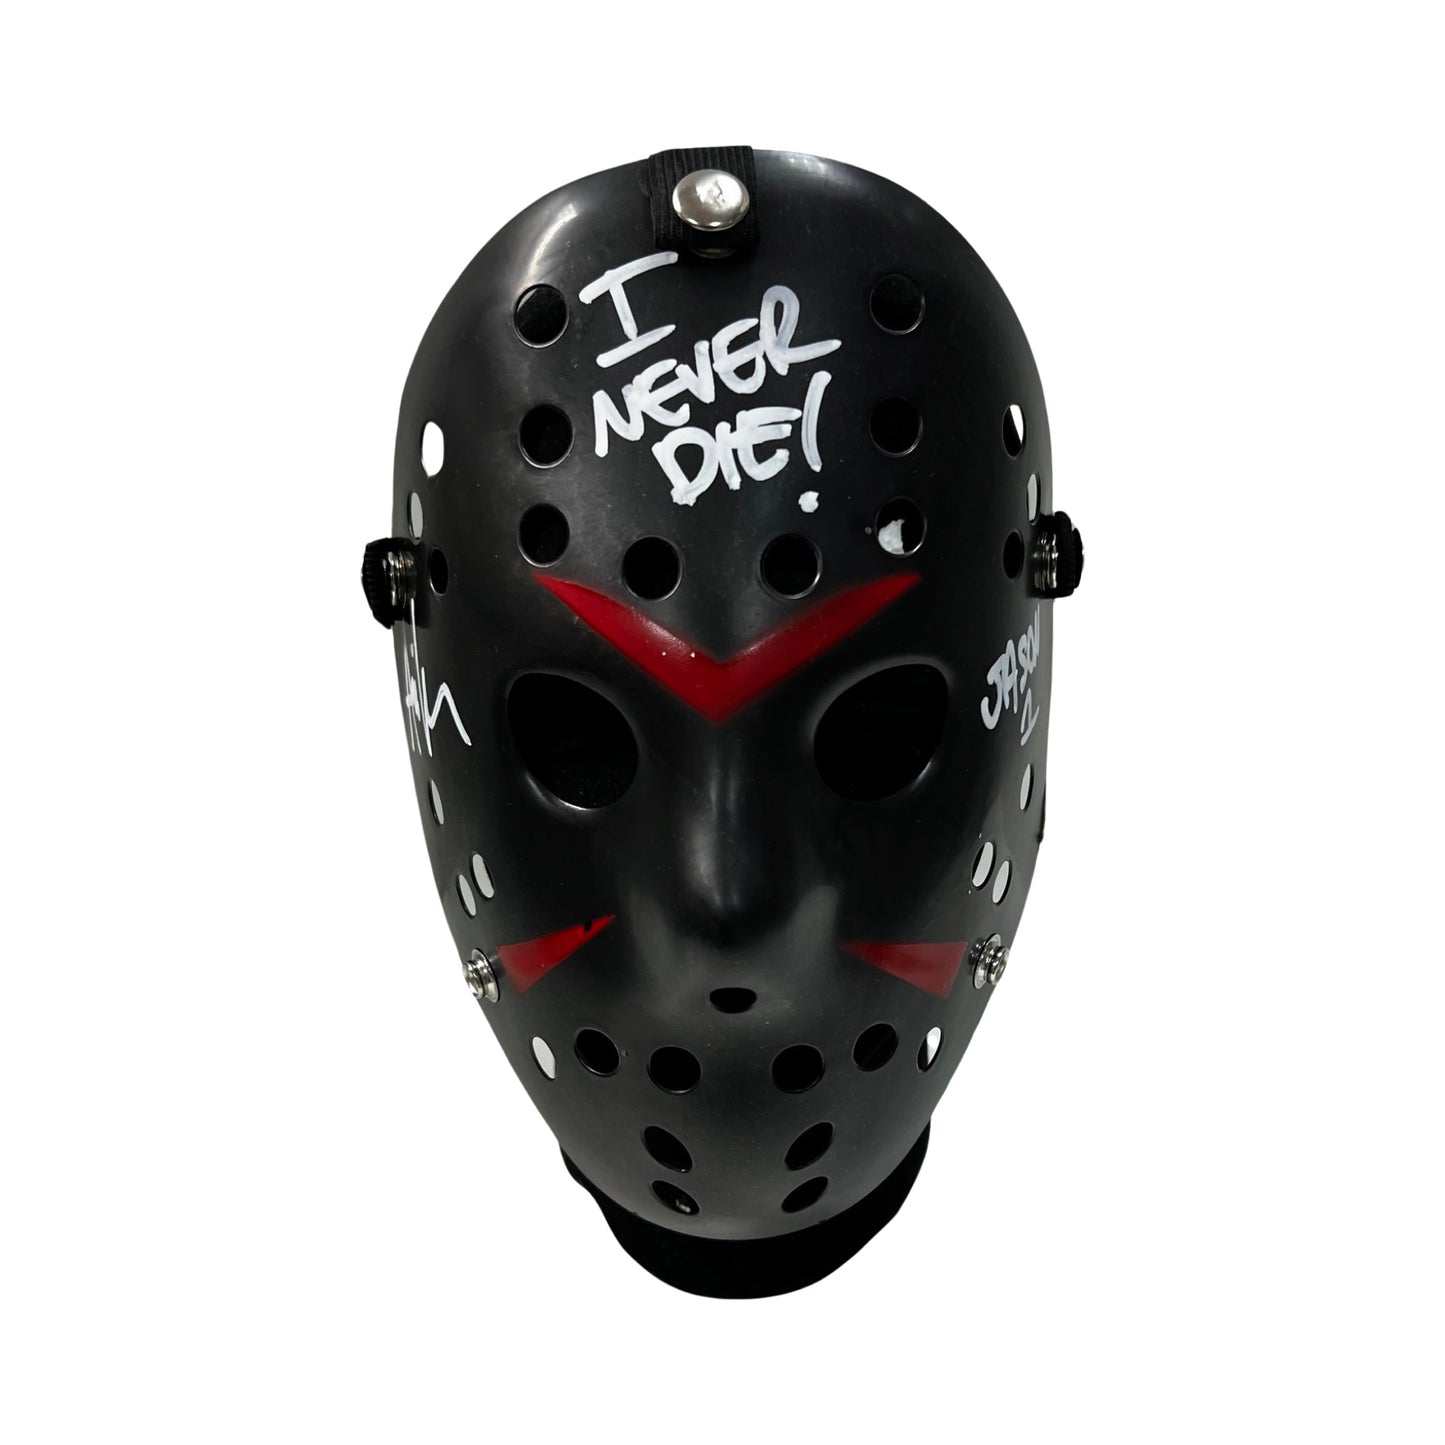 Ari Lehman Autographed Jason Voorhees Friday the 13th Black Mask “I Never Die!, Jason 1” Inscriptions White Ink Steiner CX